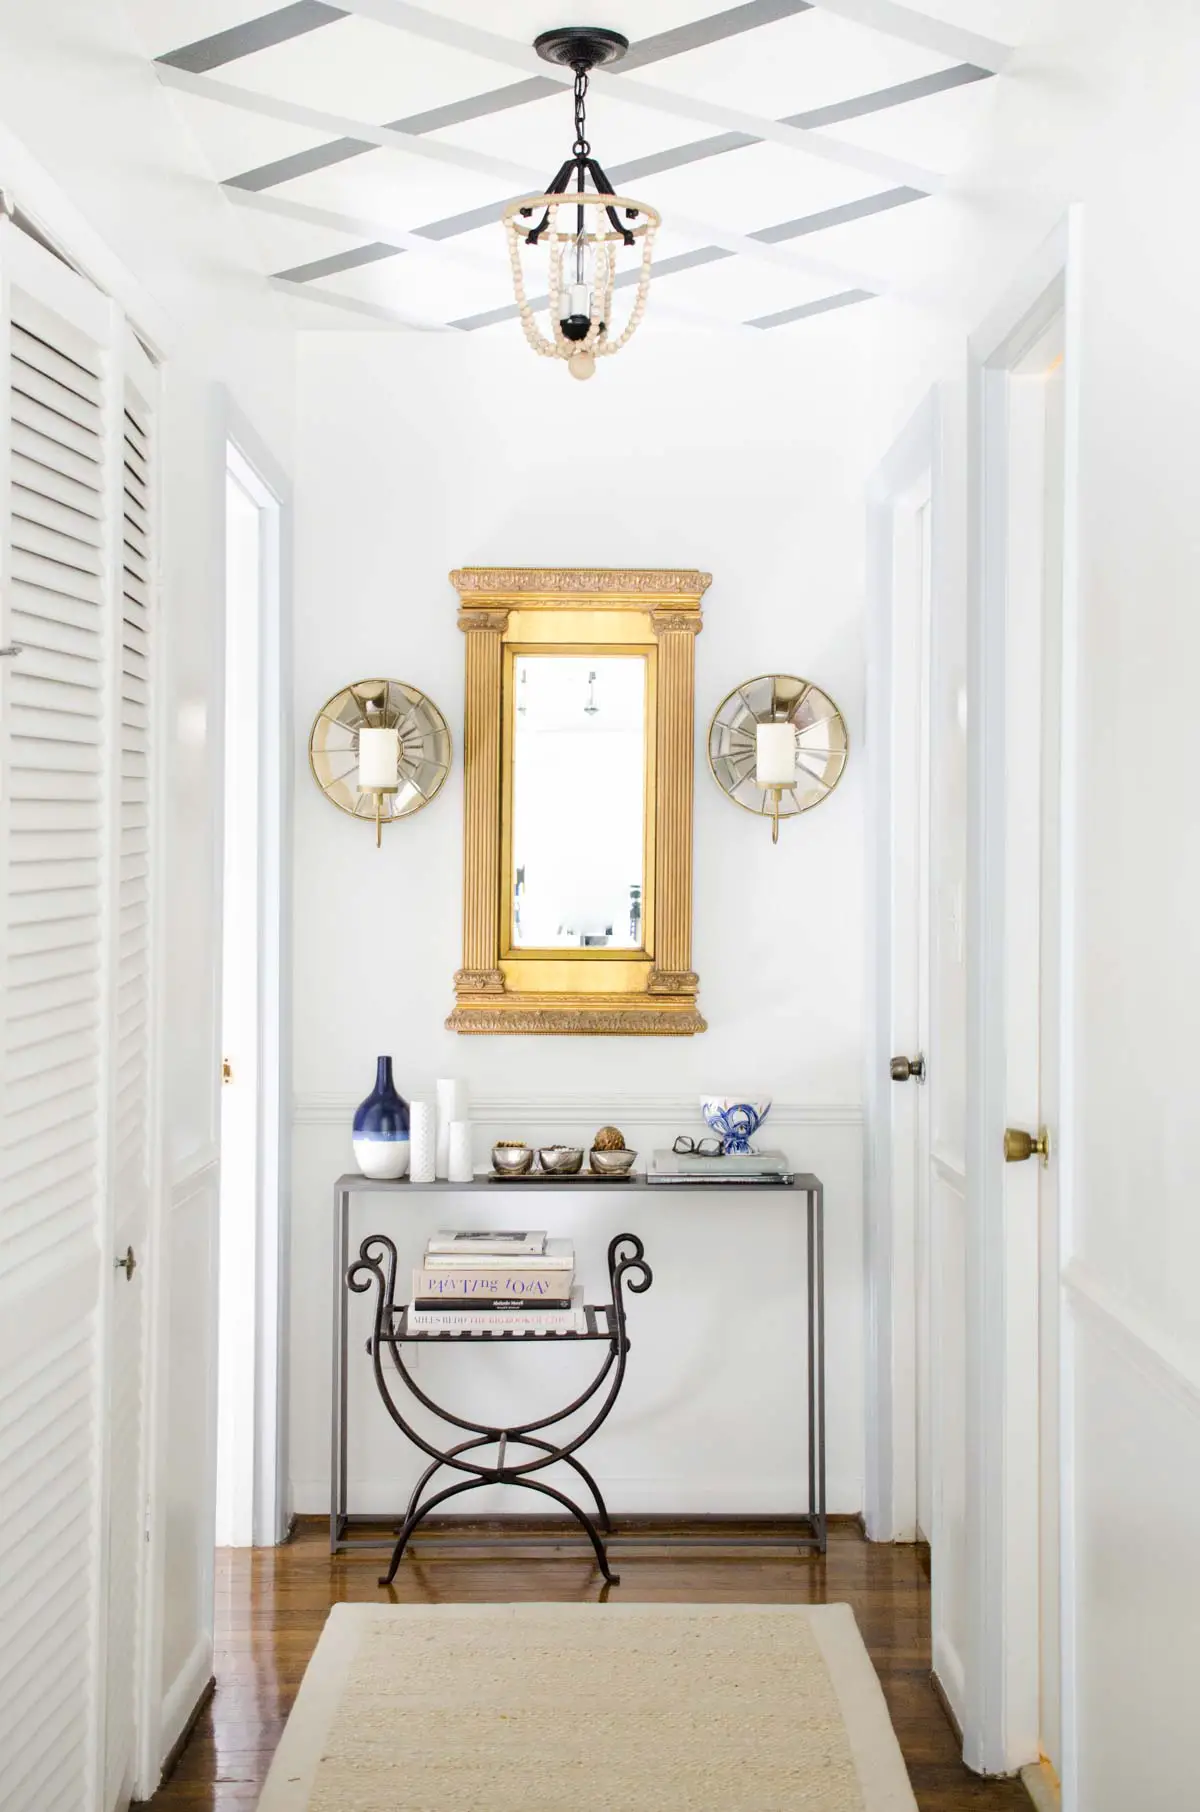 Hallway makeover with gold mirror and lattice ceiling stripes via @thouswellblog